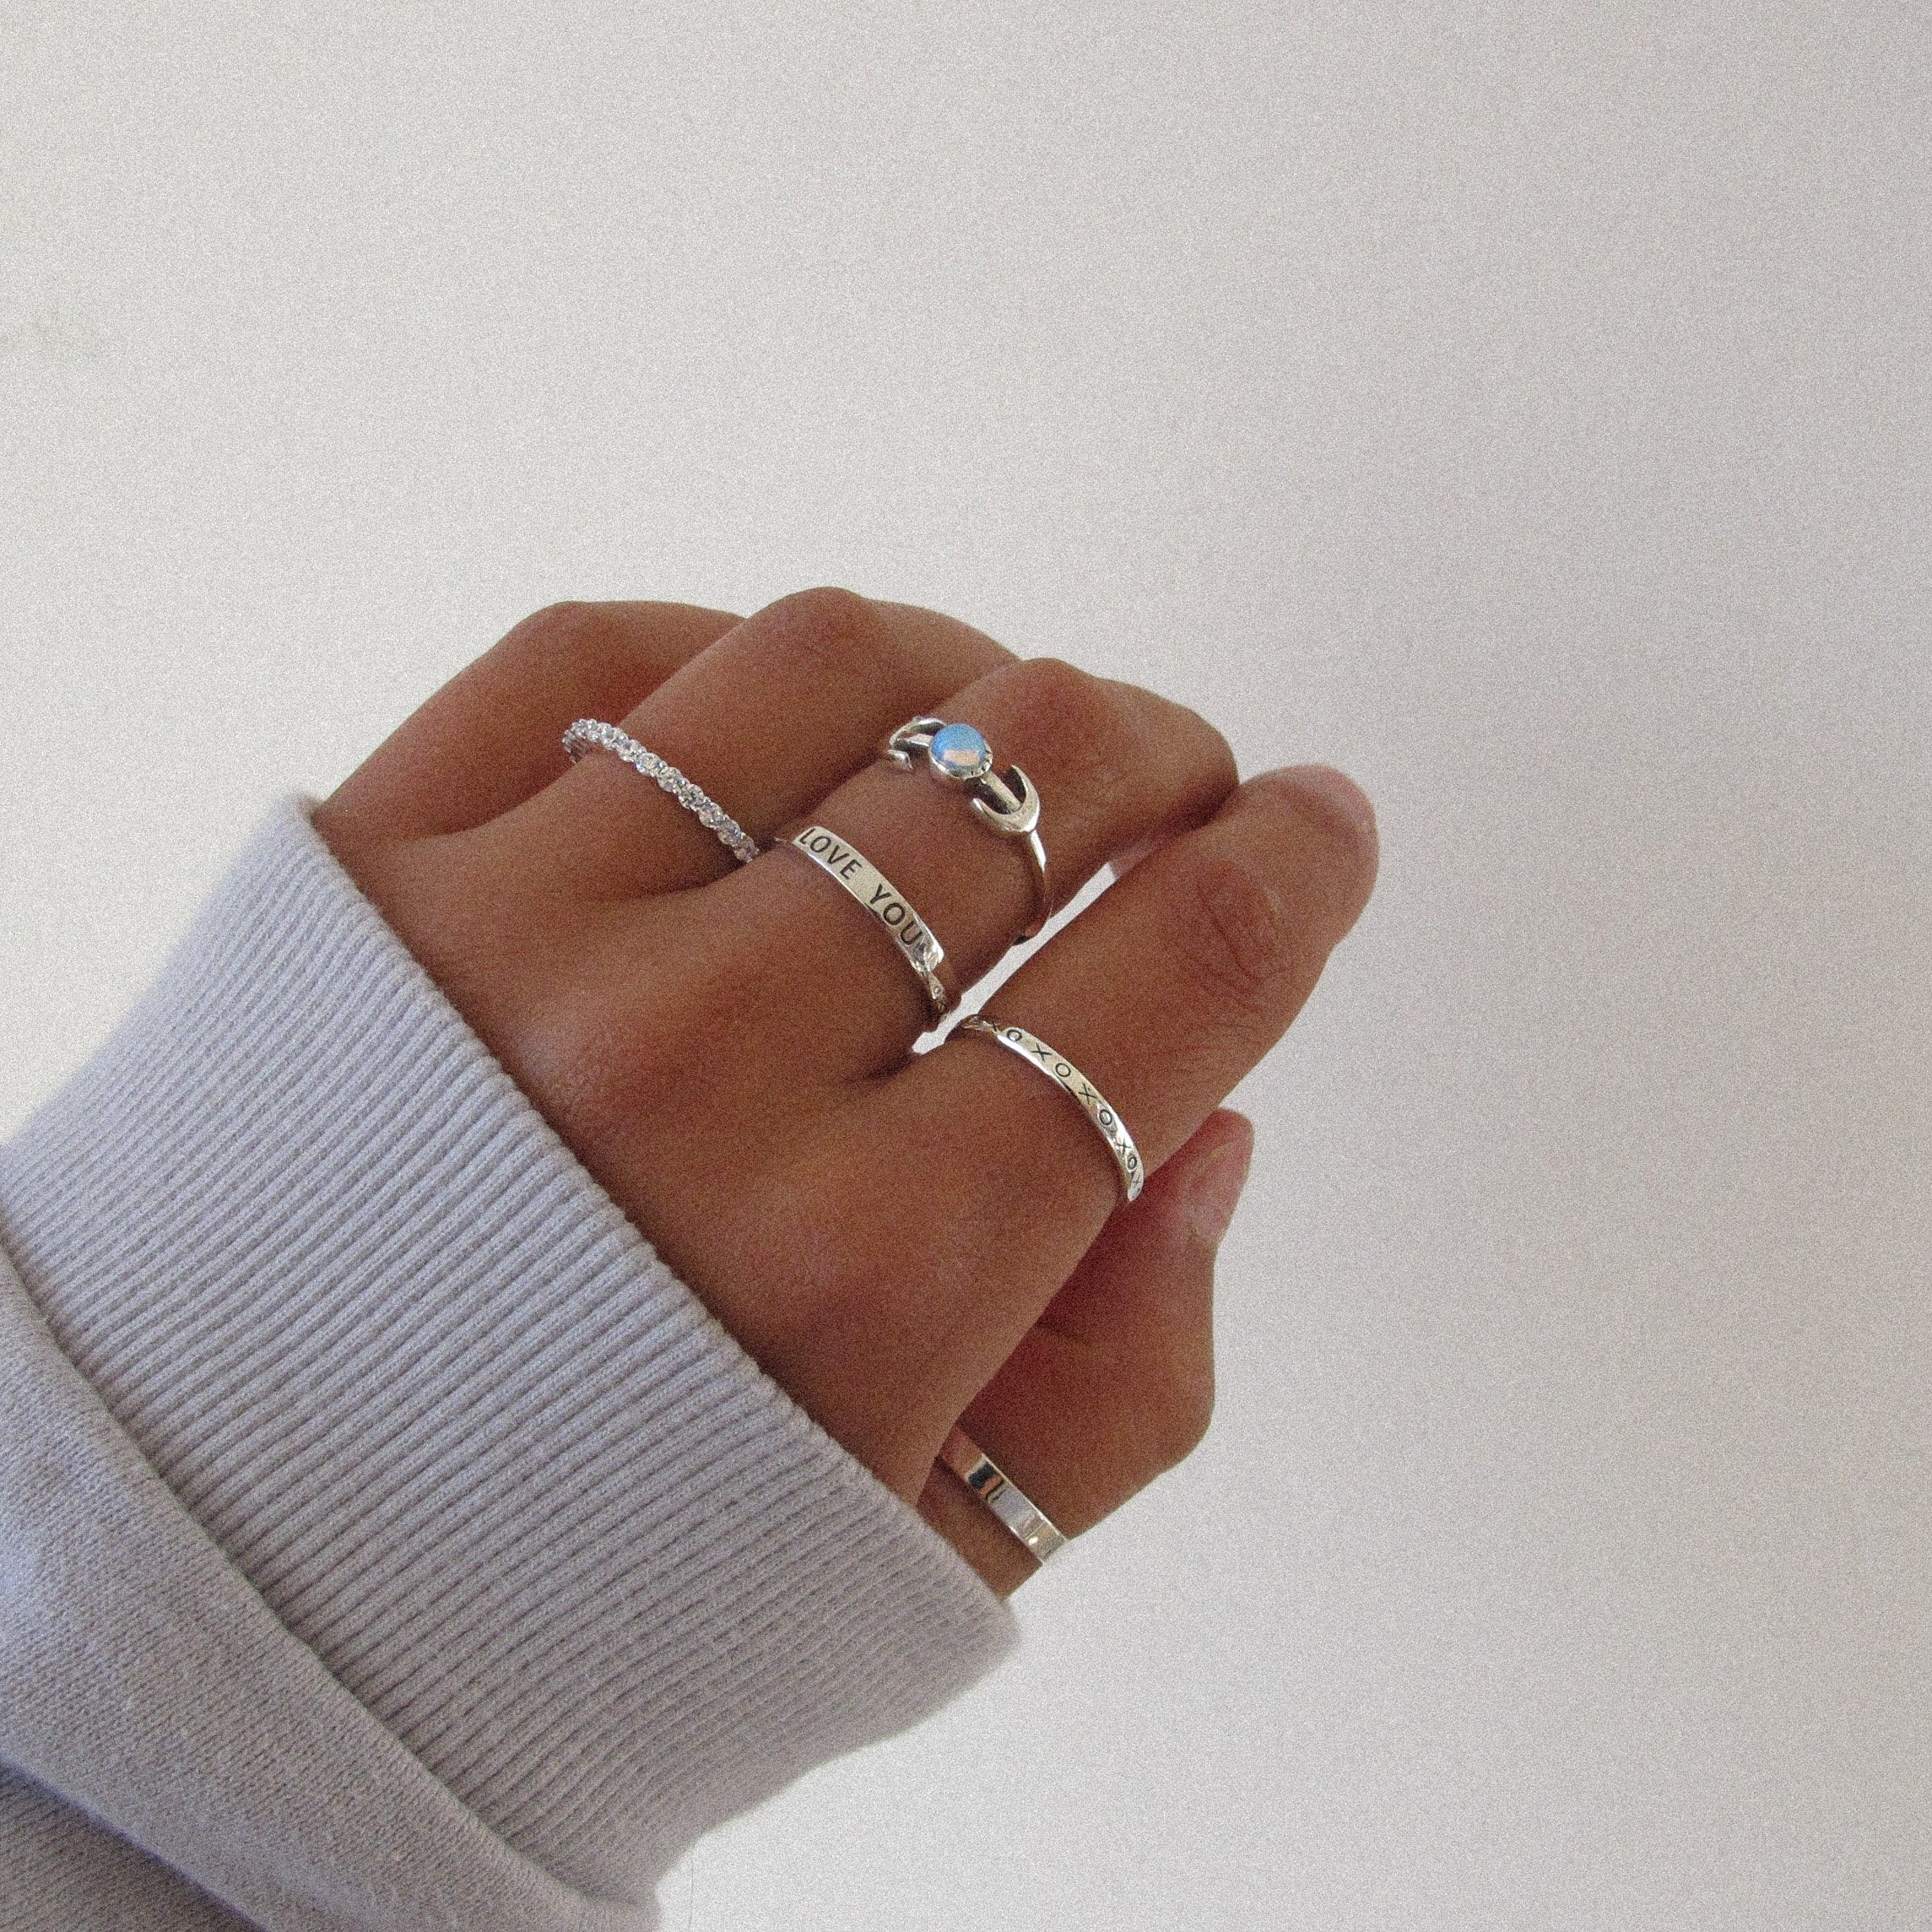 “XOXO" Sterling Silver Ring